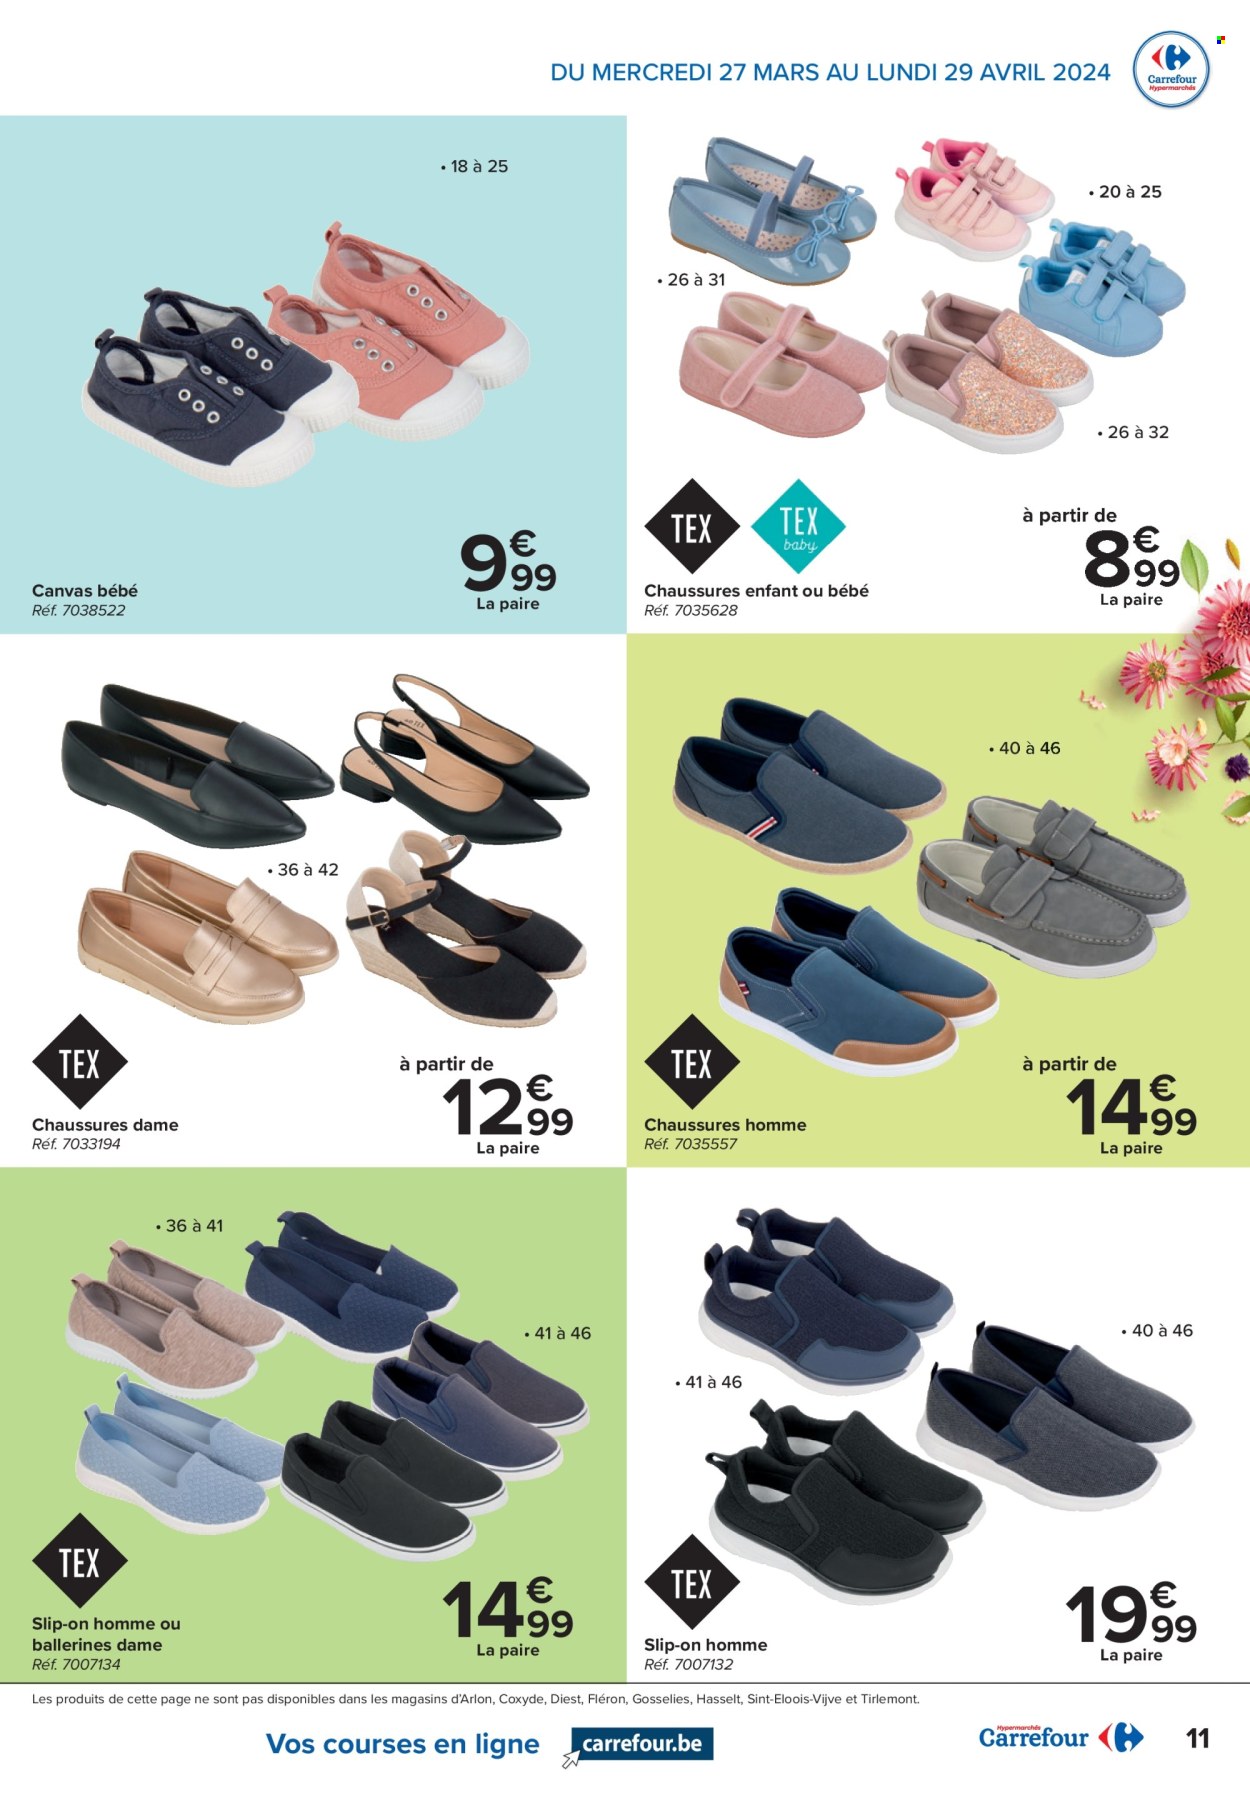 Catalogue Carrefour hypermarkt - 27.3.2024 - 29.4.2024. Page 11.